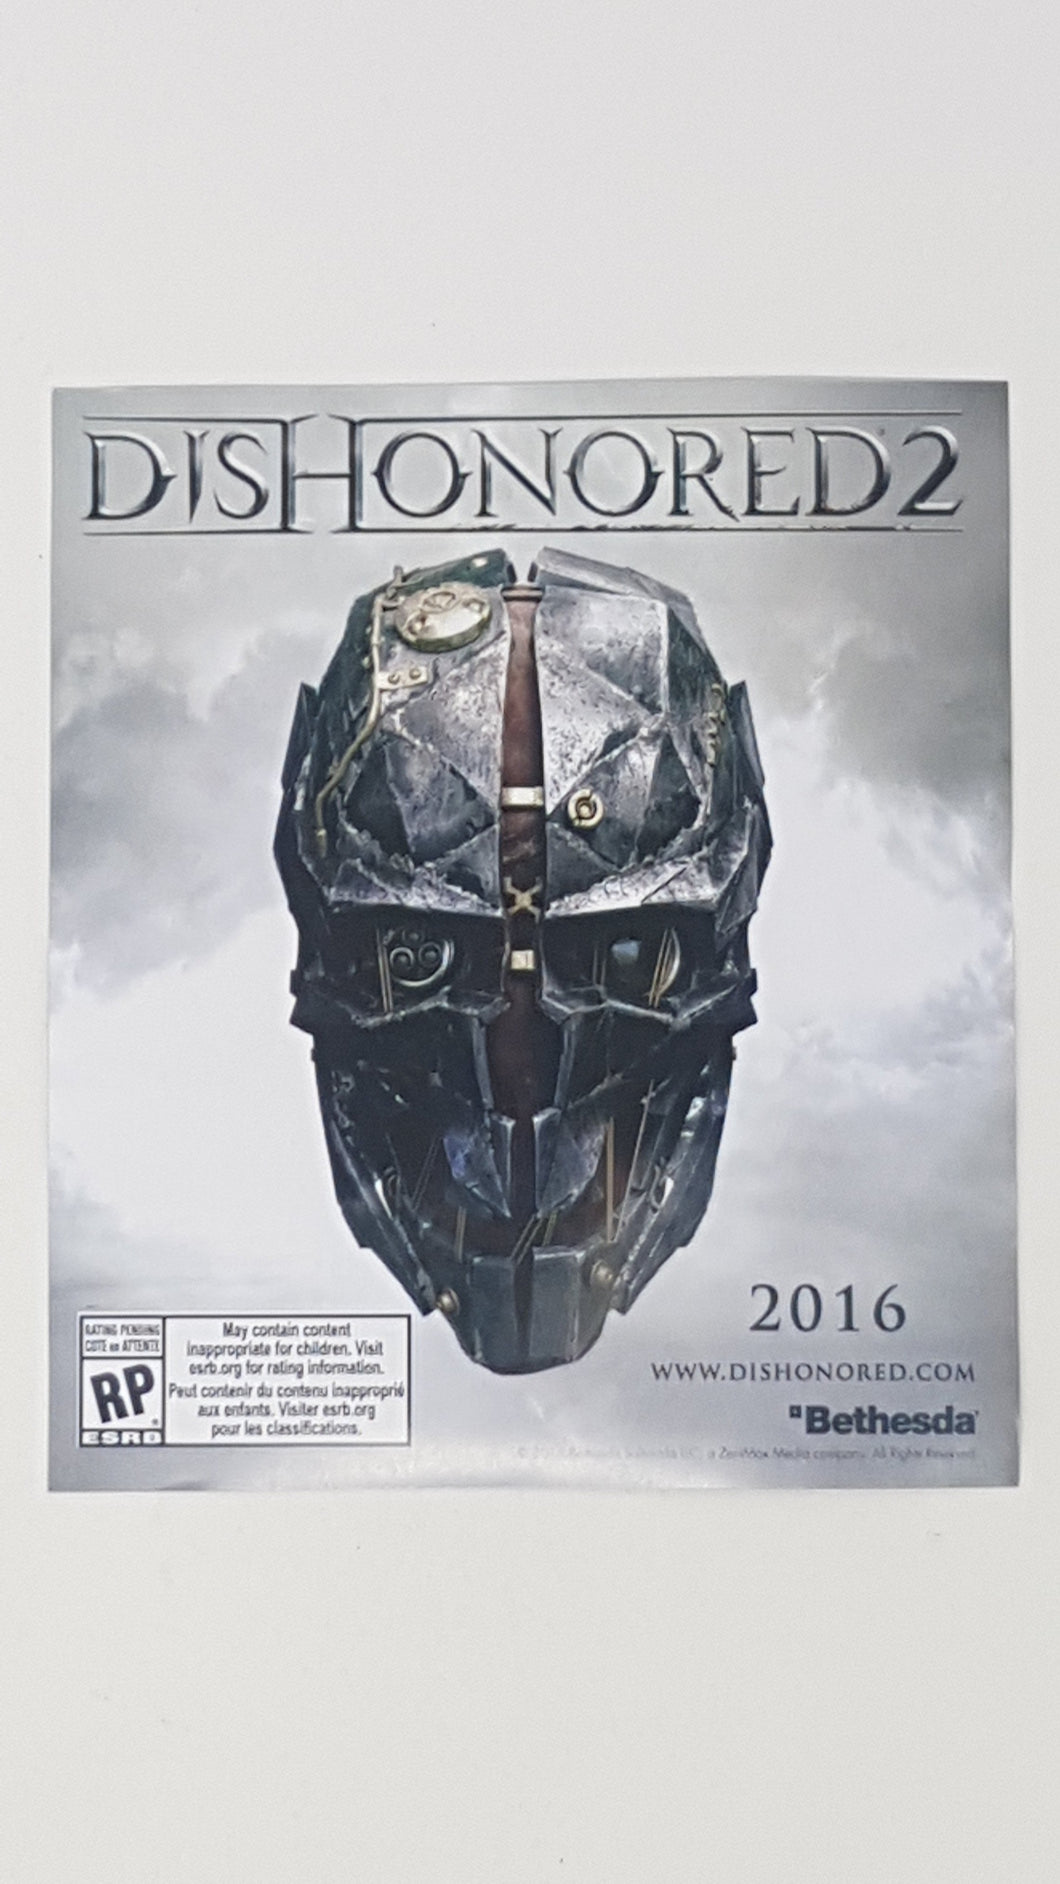 Dishonored 2 [Insertion] - Sony Playstation 4 | PS4